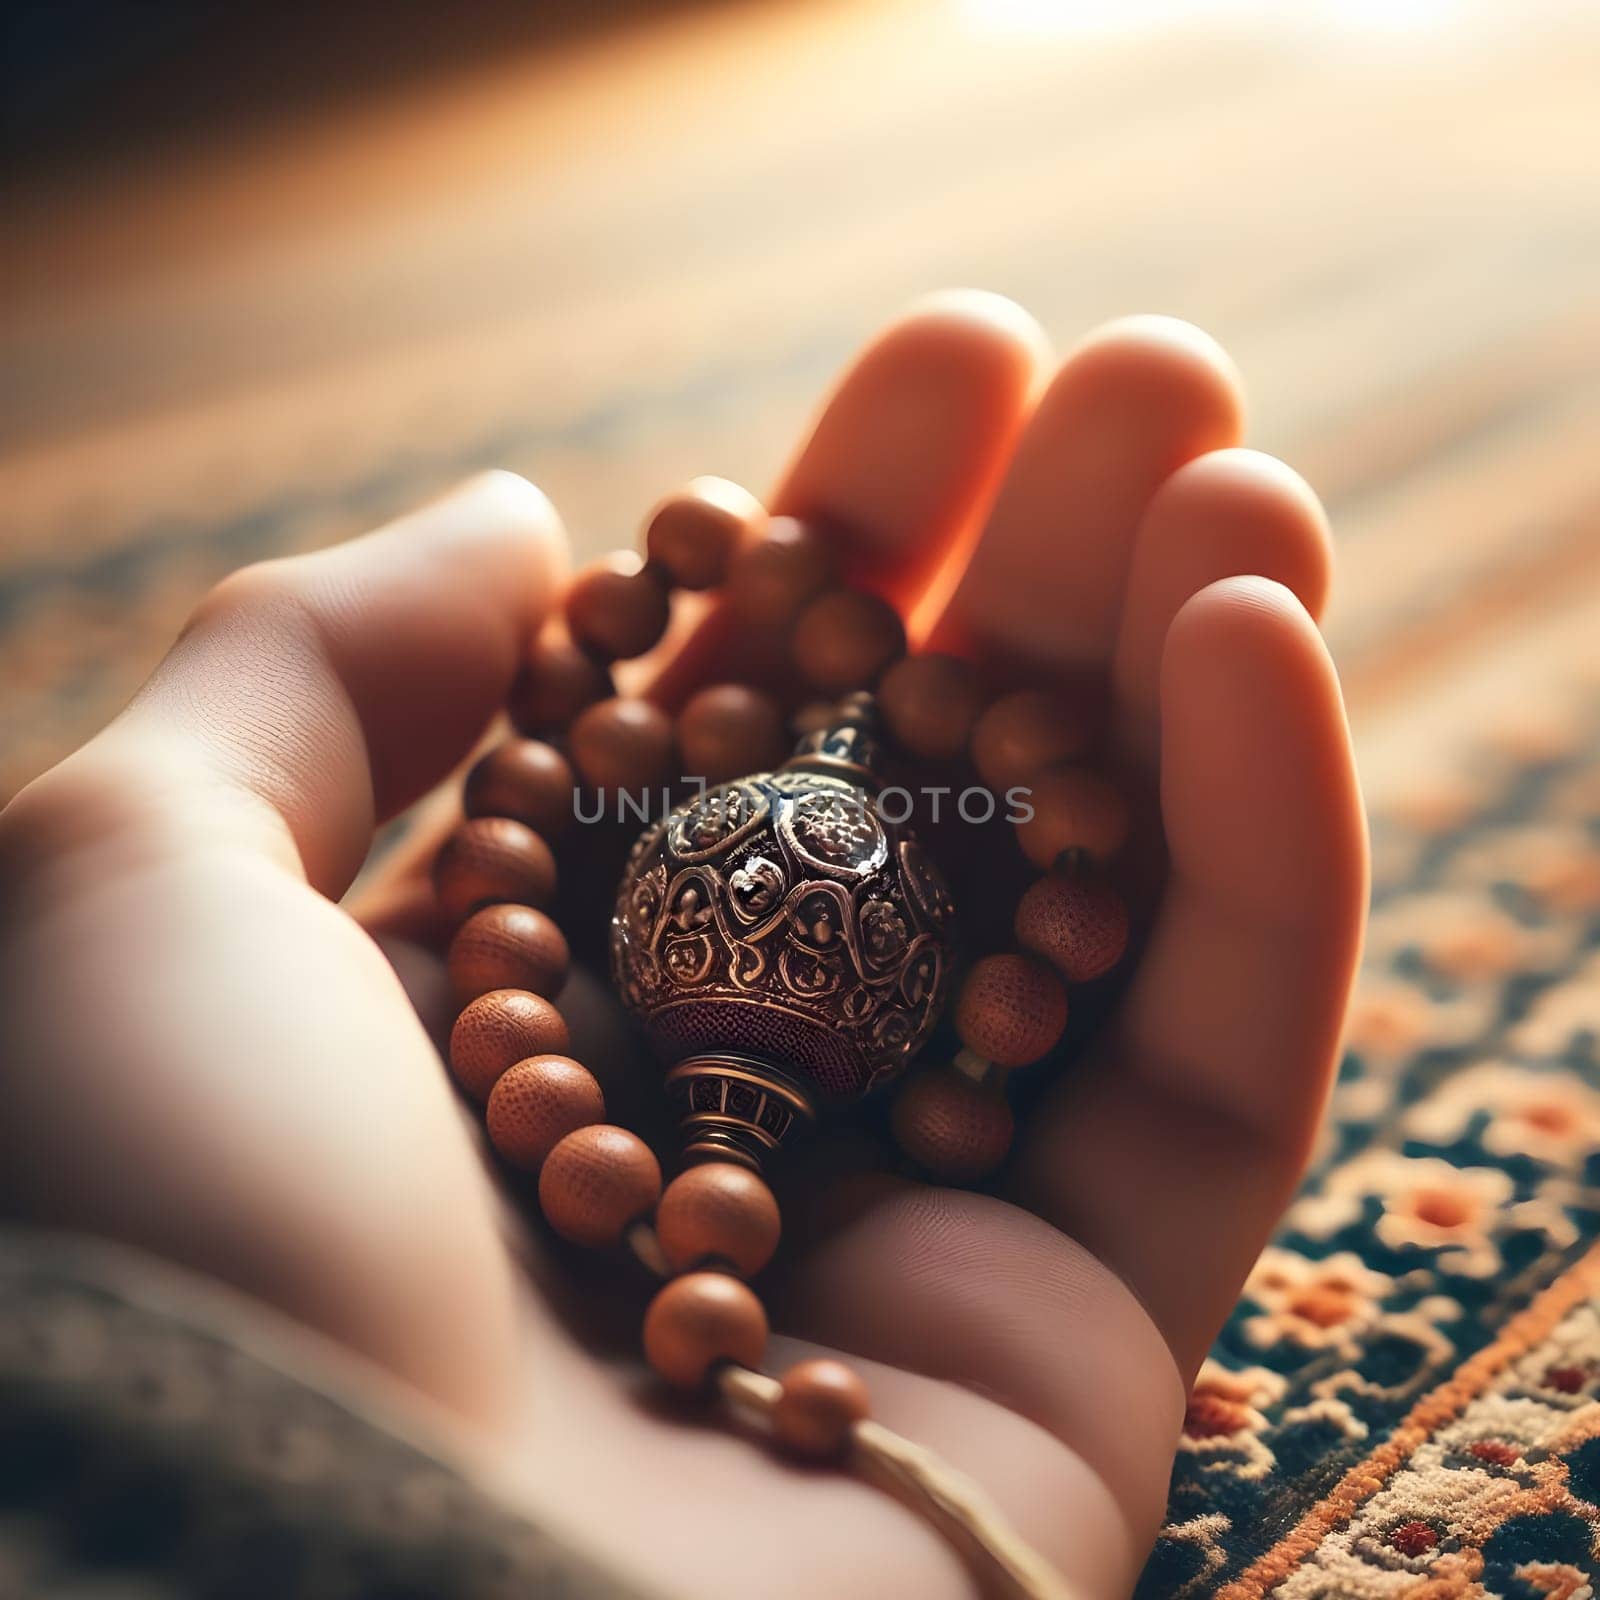 A close up of a beautifully crafted prayer bead held gently between fingers, with a soft focus on a prayer rug in the background. Happy ramadan, ramadhan, ramazan by Designlab